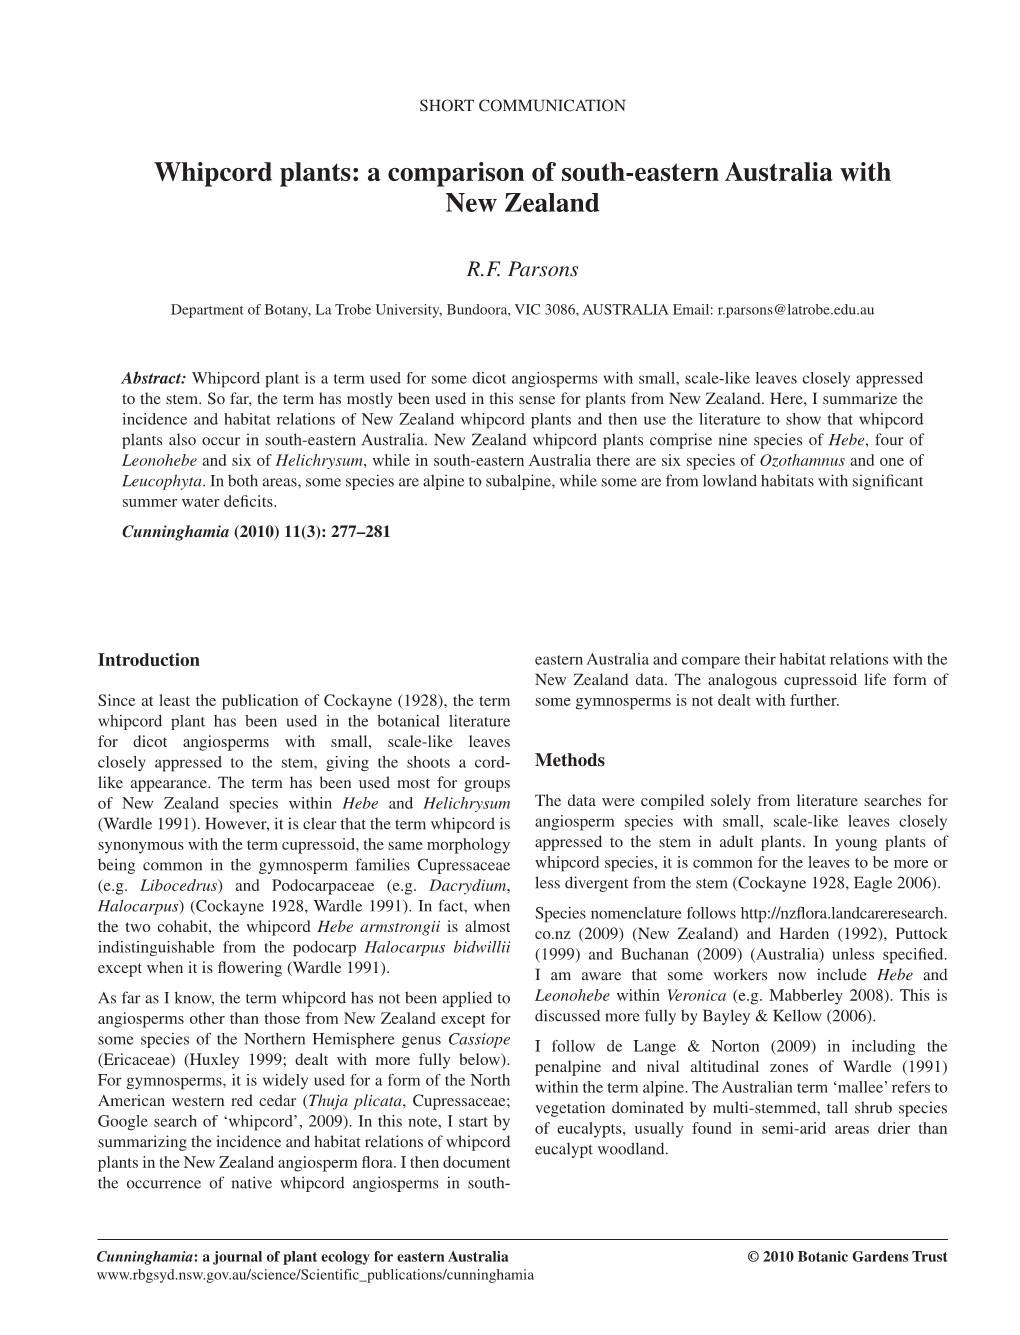 Whipcord Plants: a Comparison of South-Eastern Australia with New Zealand